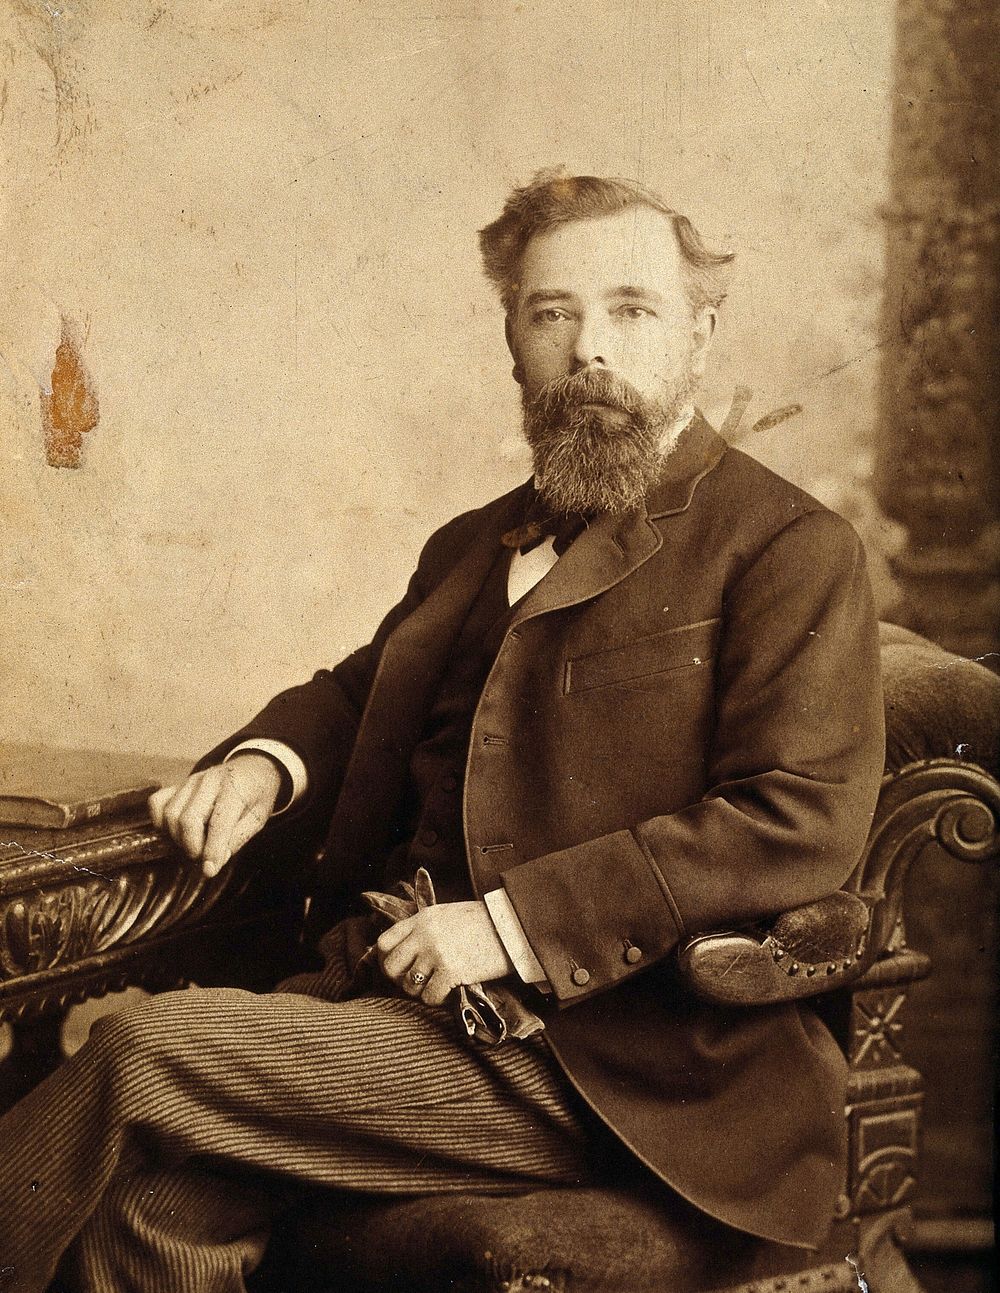 F. W. Wittmore. Photograph by Draycott.